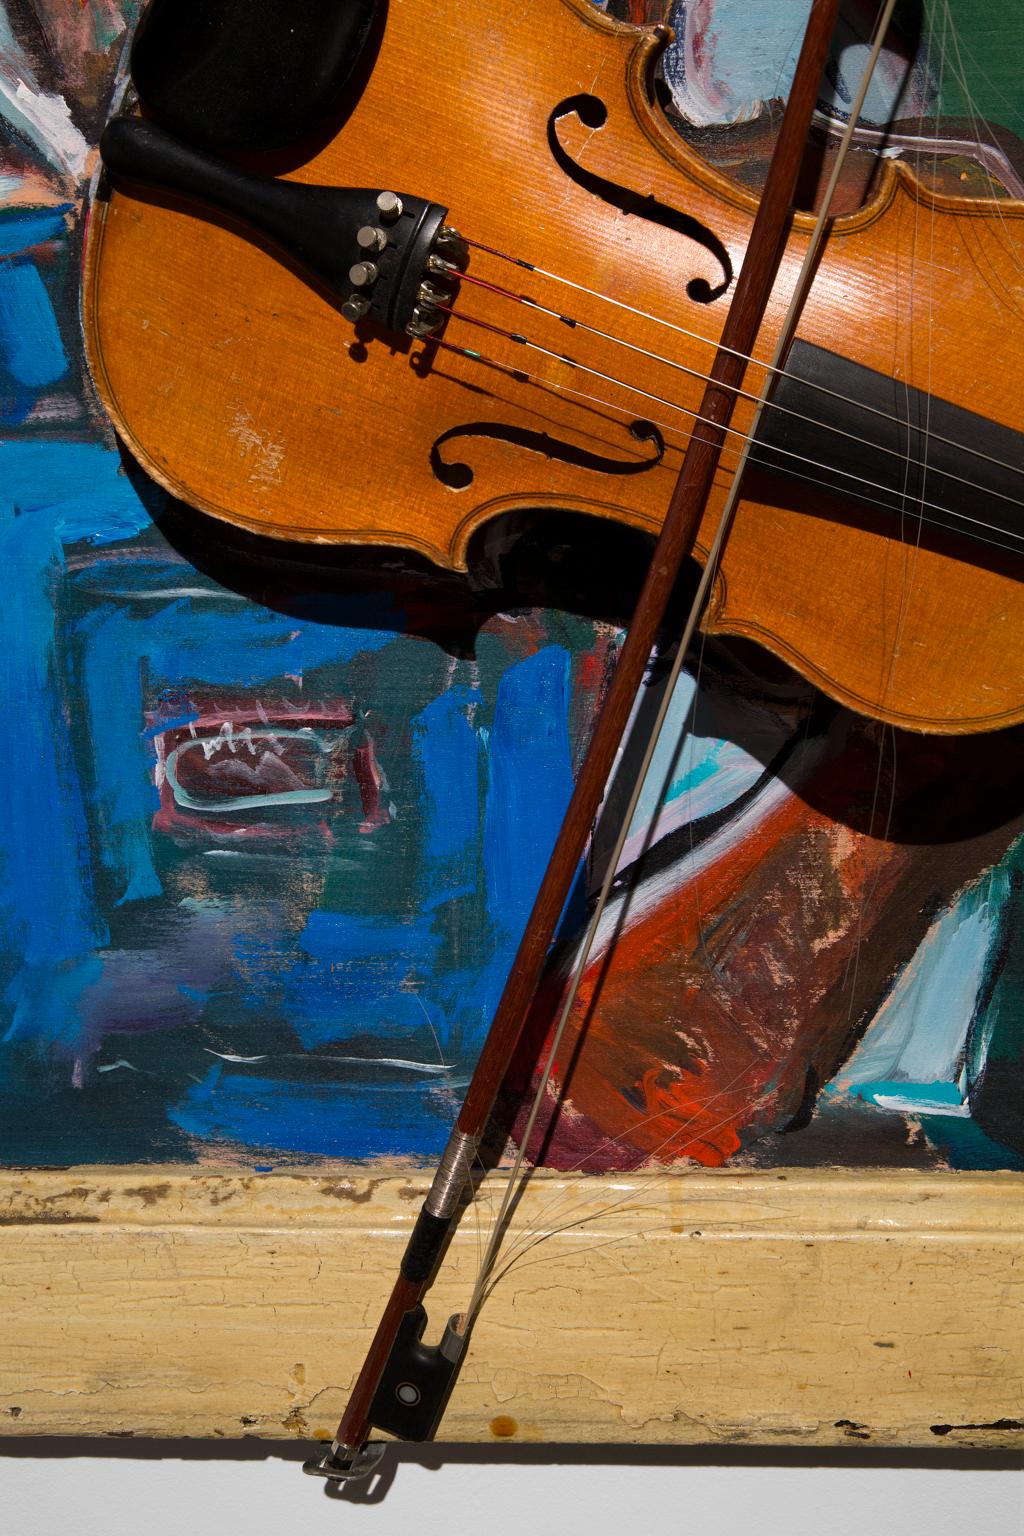 Wayne Manns has been a lover of music and art his entire life. He is a self-taught “Outsider Artist” or “Folk Artist” and paints the world around him. “Violin Player” is a colorful, delightful example of his love of and response to music, musicians